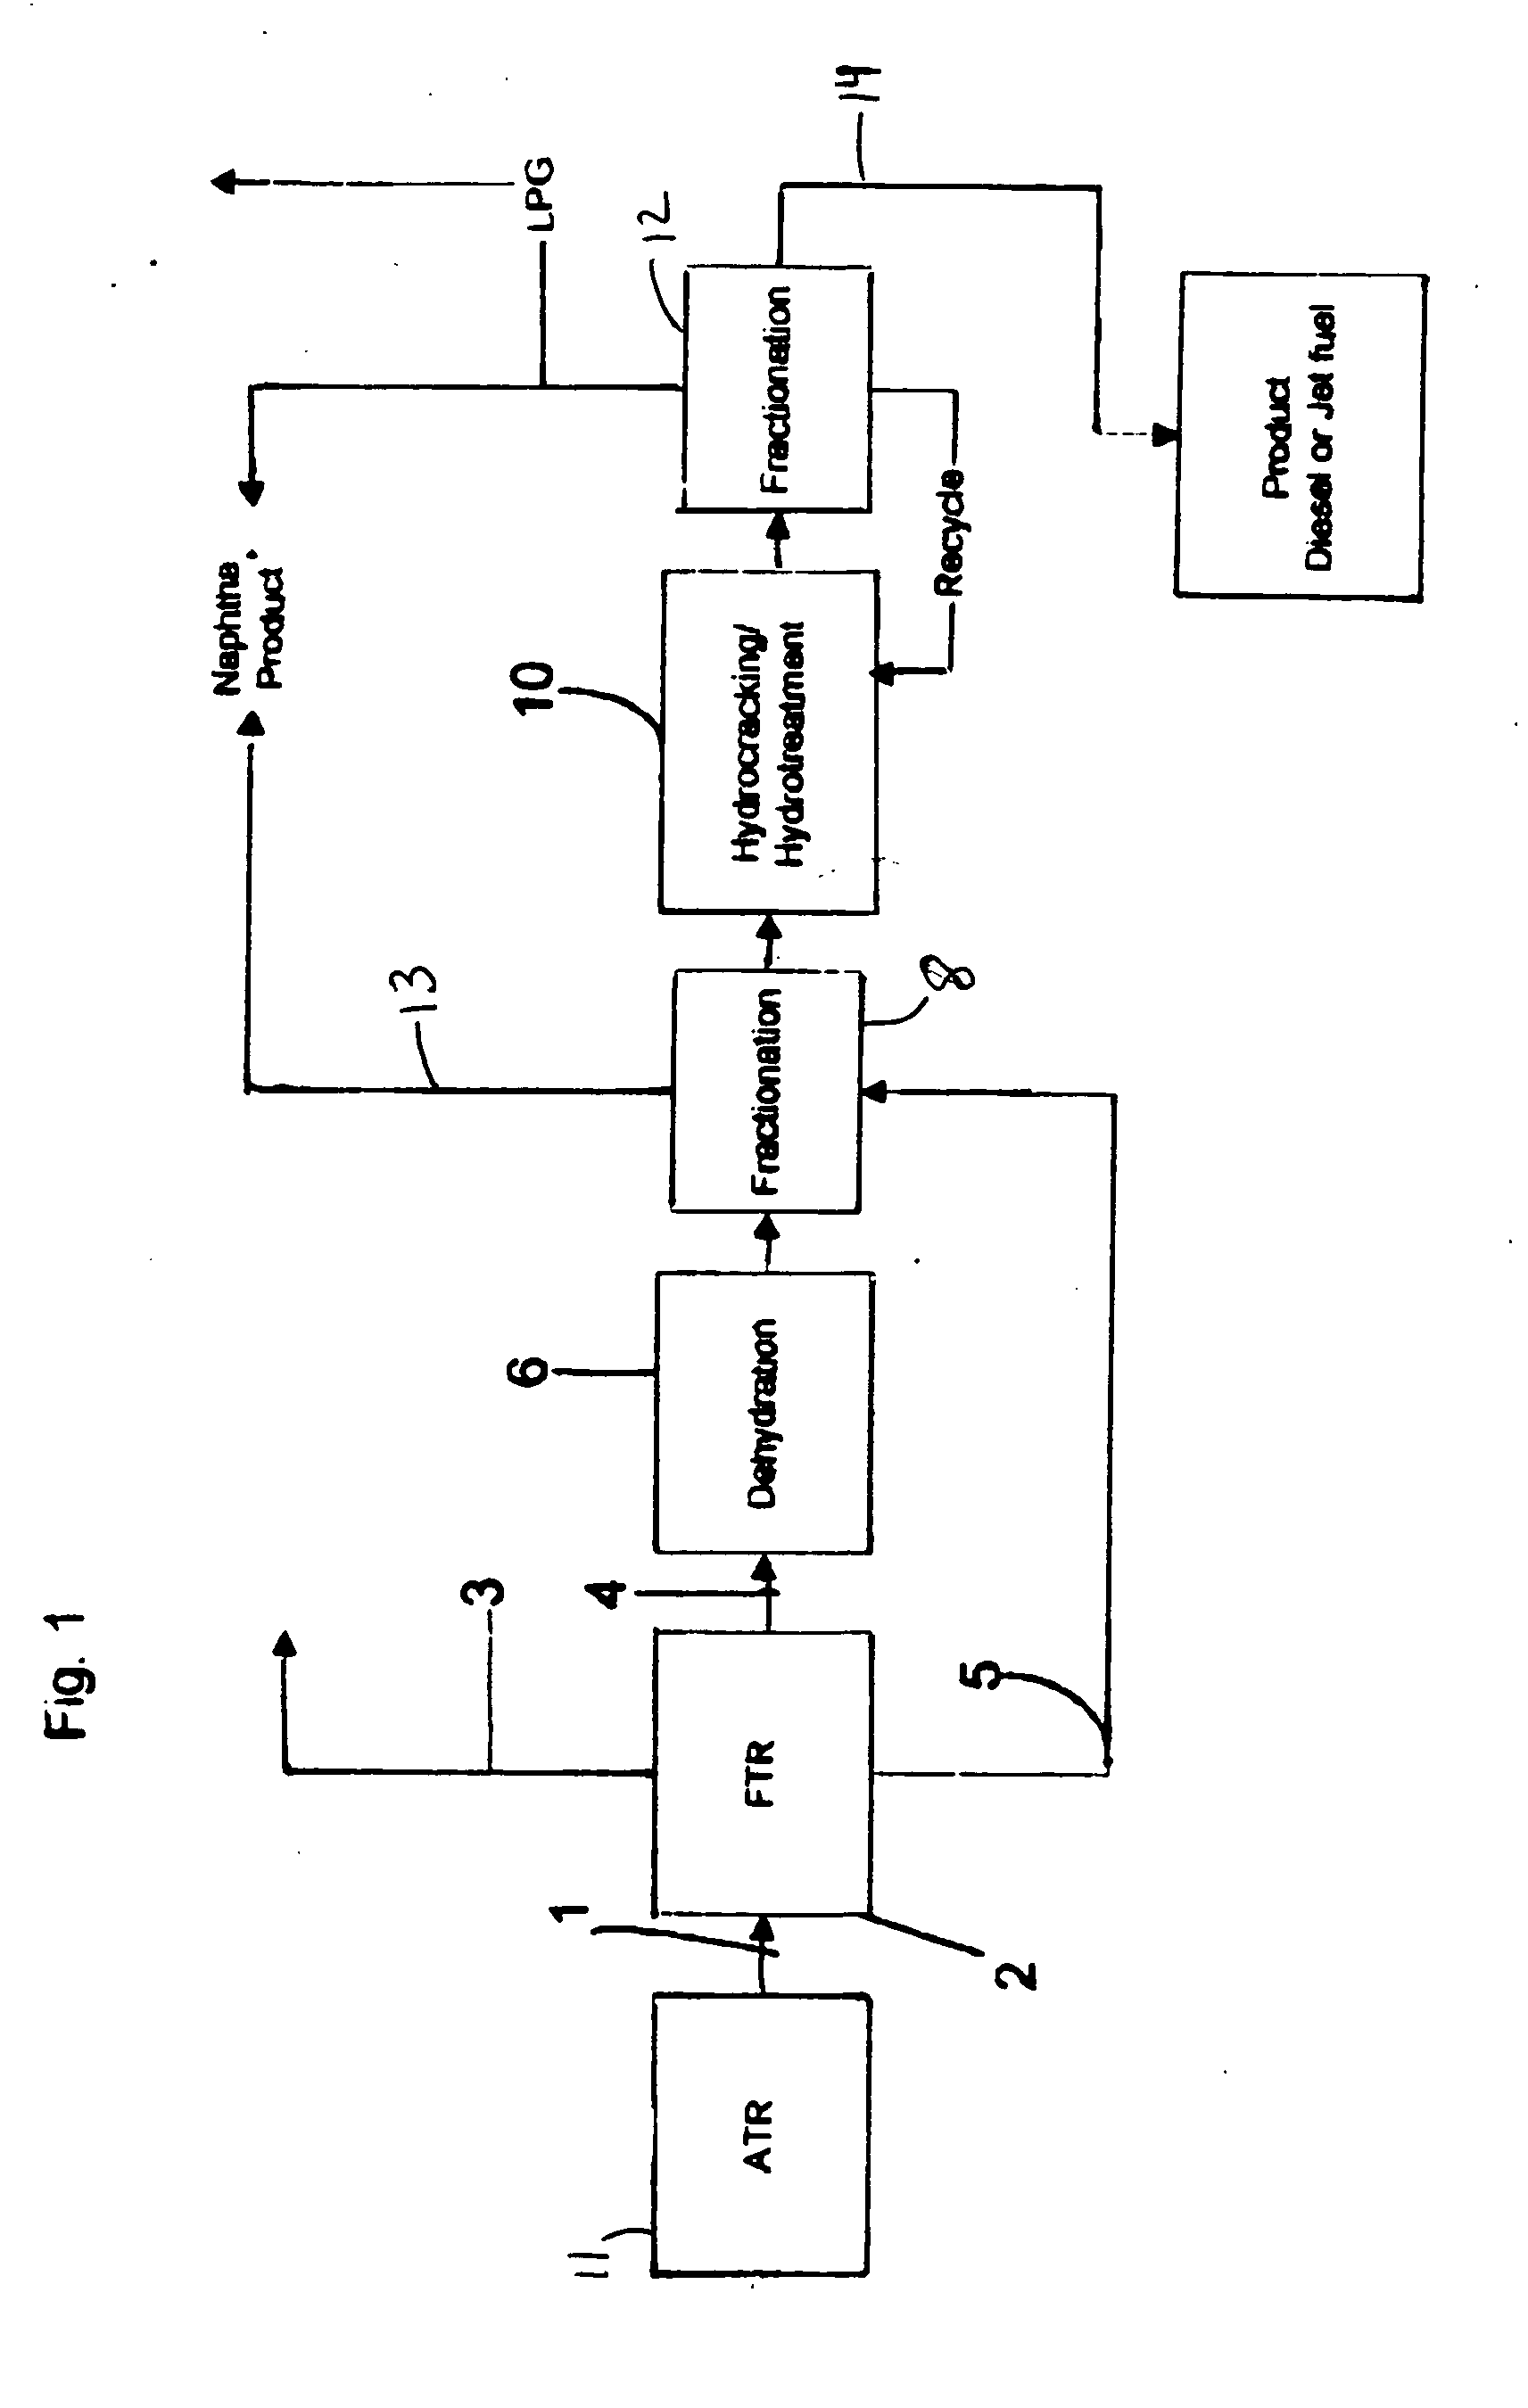 Synthetic transportation fuel and method for its production